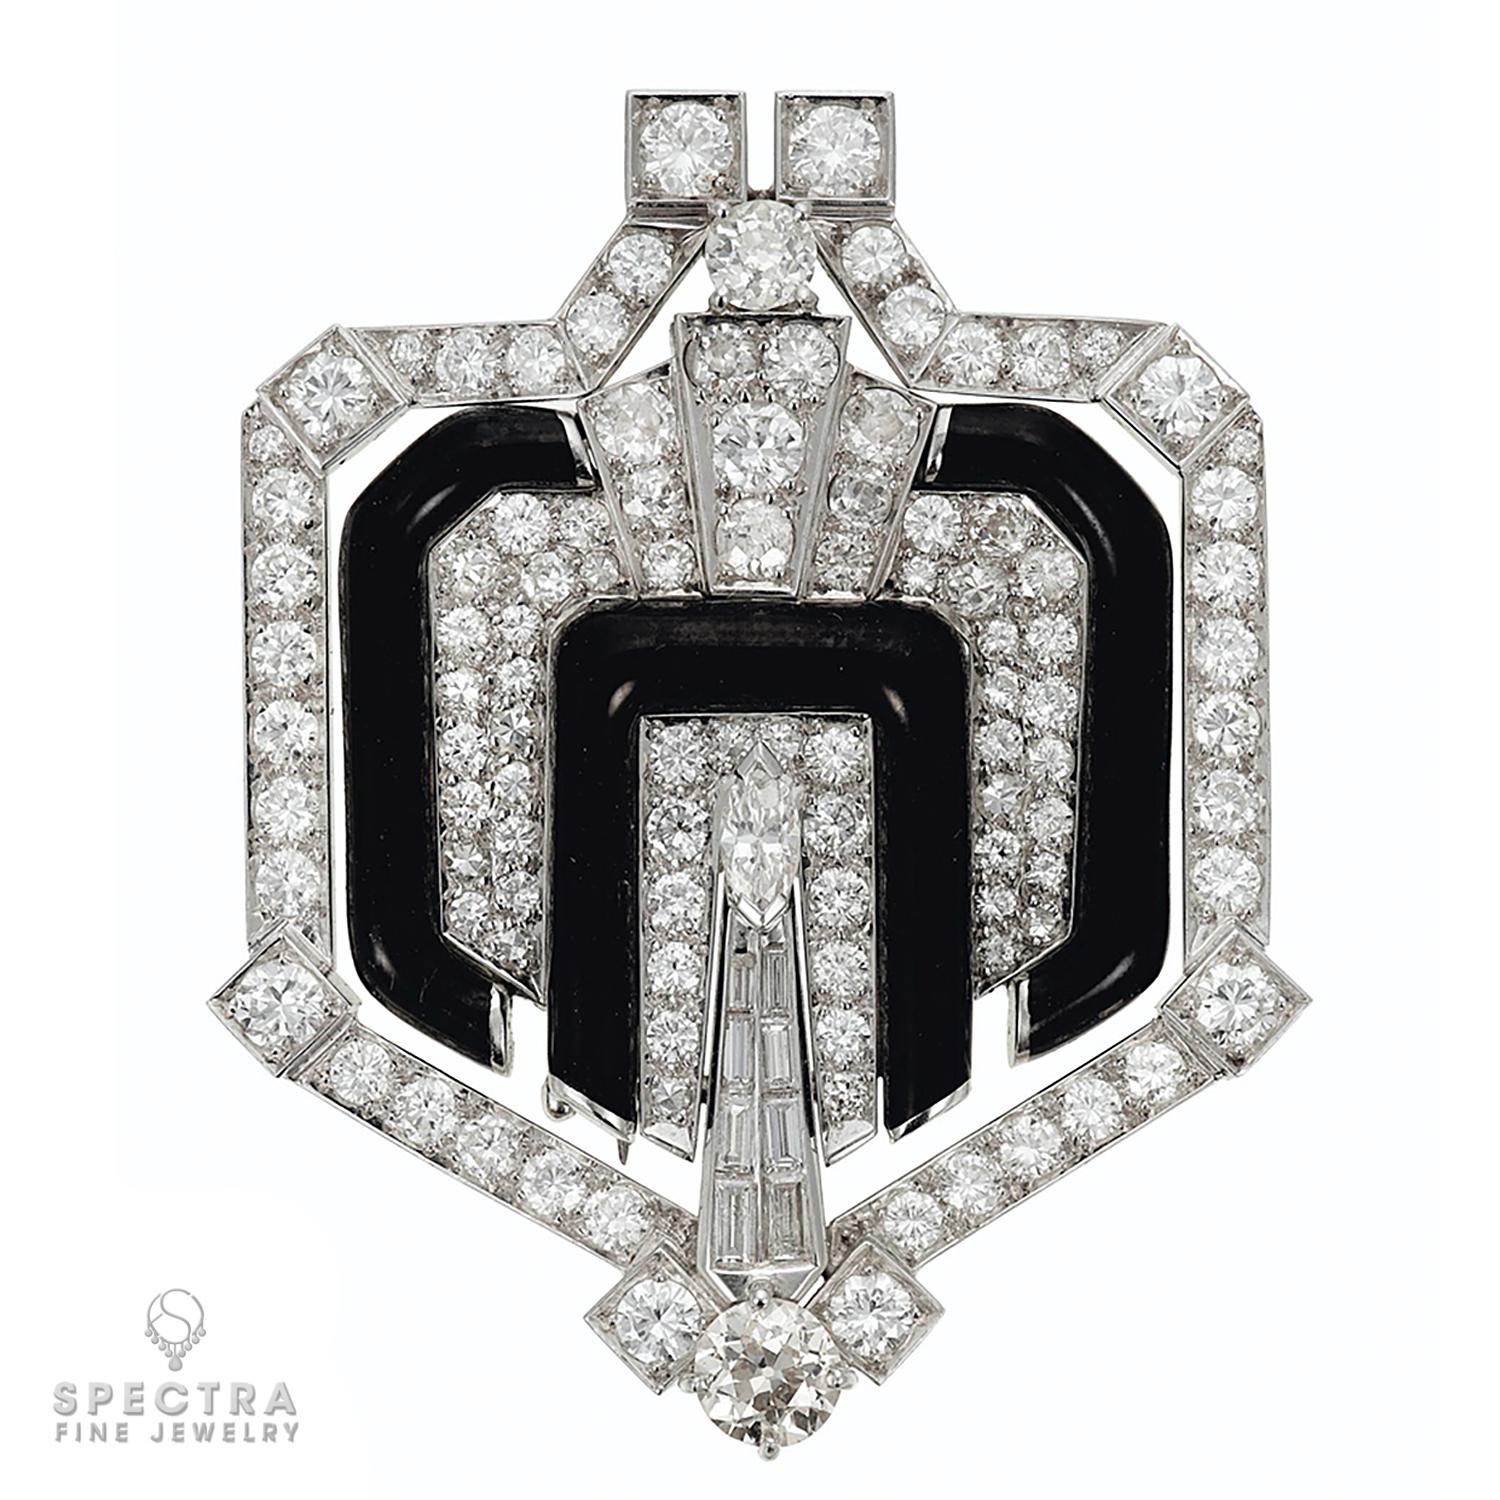 The Diamond Enamel Platinum Brooch by David Webb stands out as a masterpiece of luxury and sophistication. This exquisitely crafted brooch displays a stunning design that perfectly combines high-quality materials and brilliant gemstones.

The